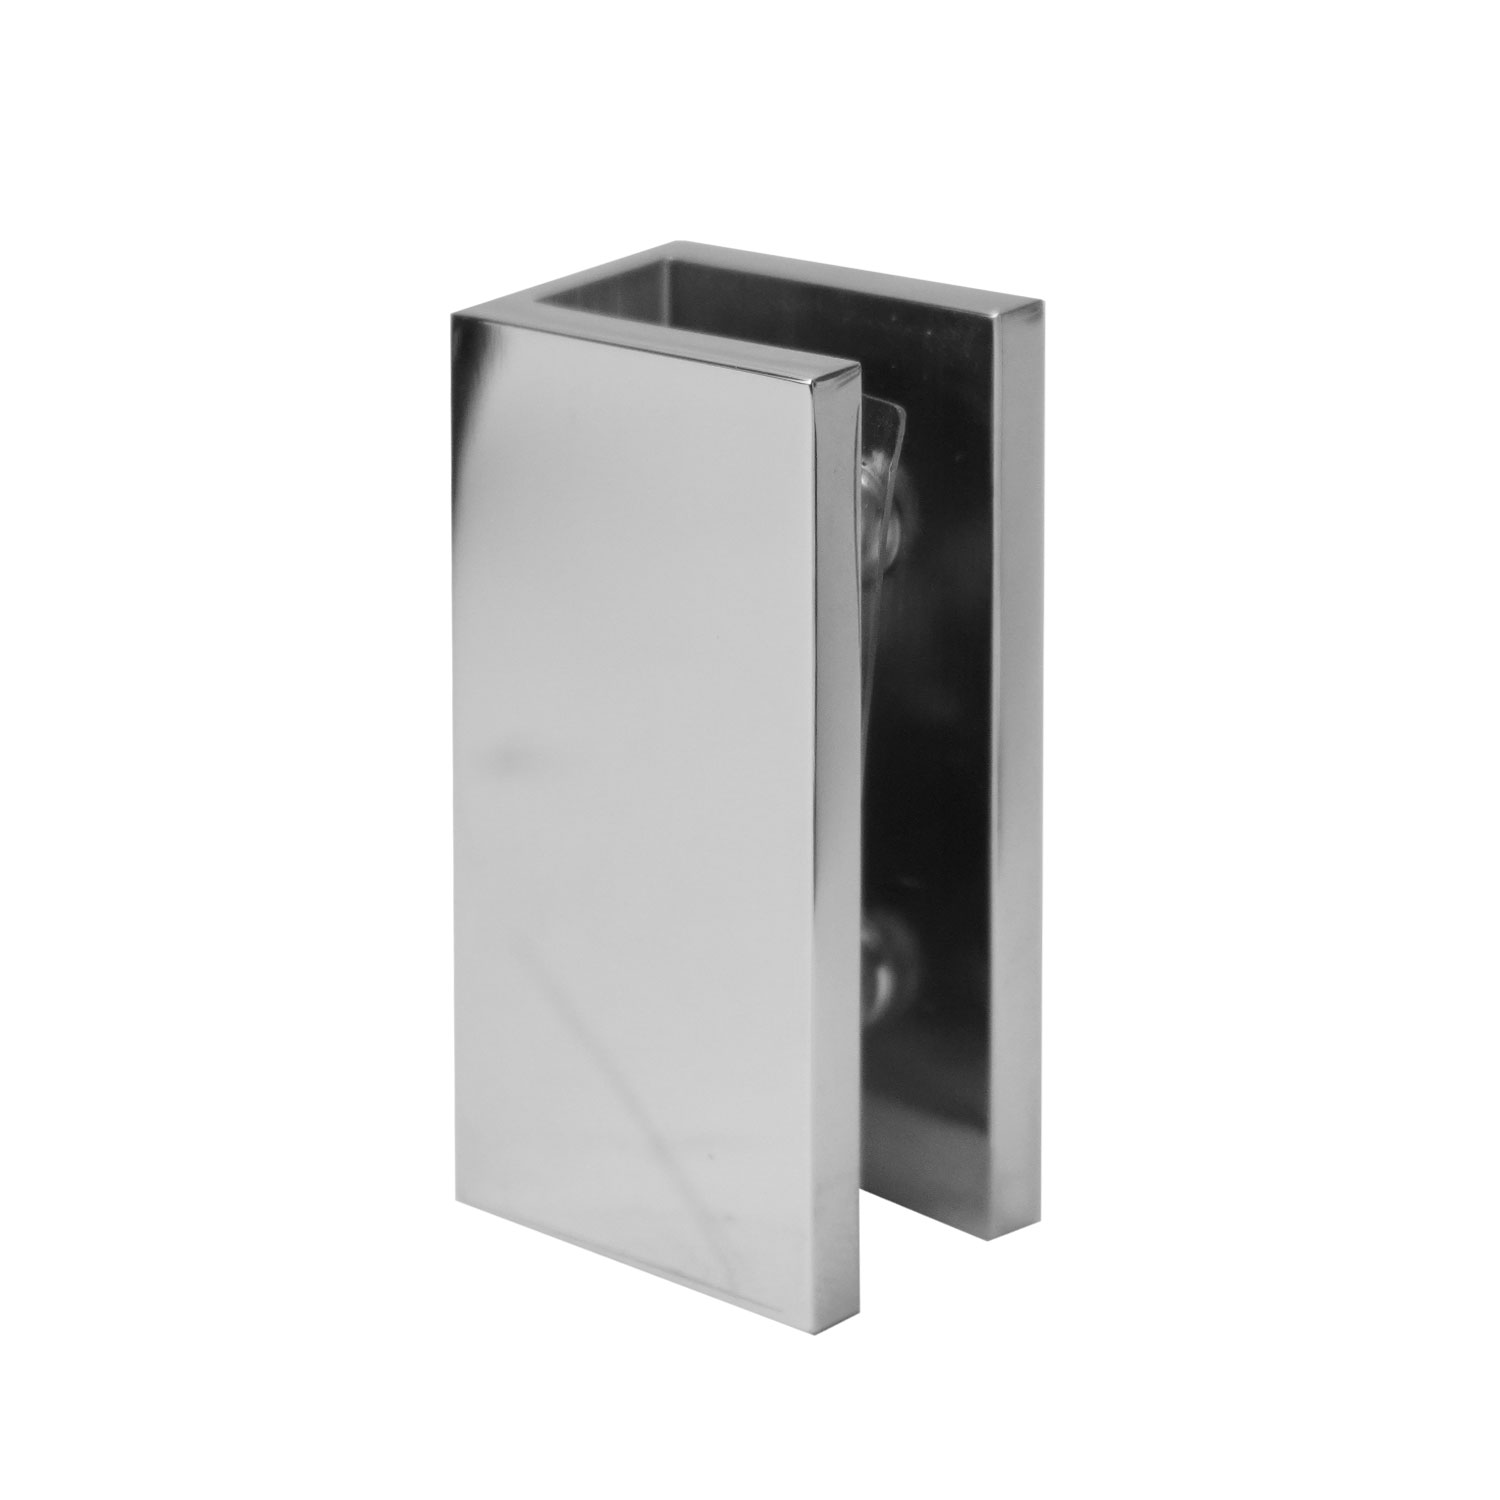 Glass to Wall/Floor U-Clamp 25mm x 50mm - Square Series (Chrome Finish)